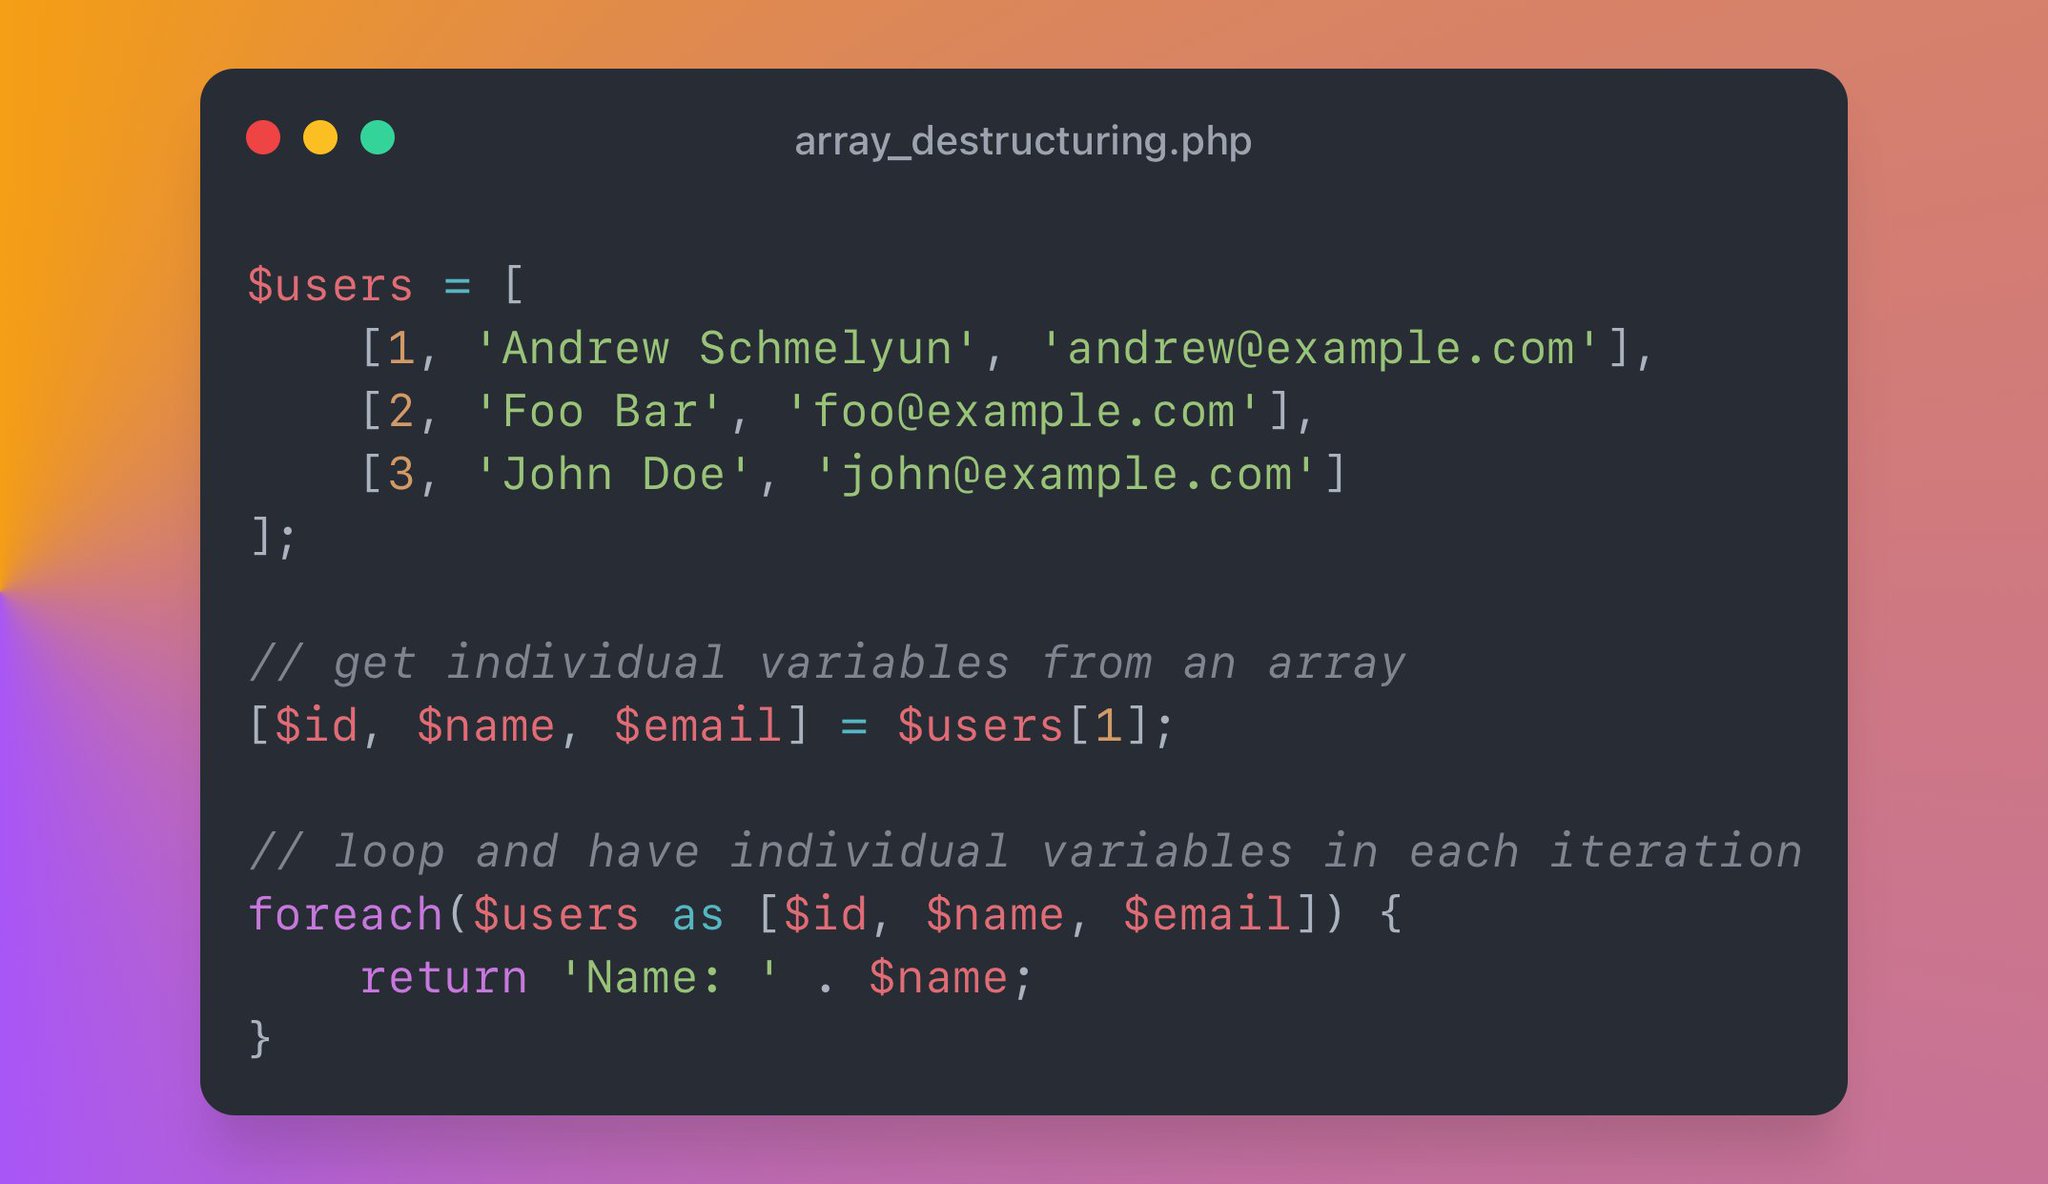 Array destructuring in PHP is very powerful, yet still underutilized